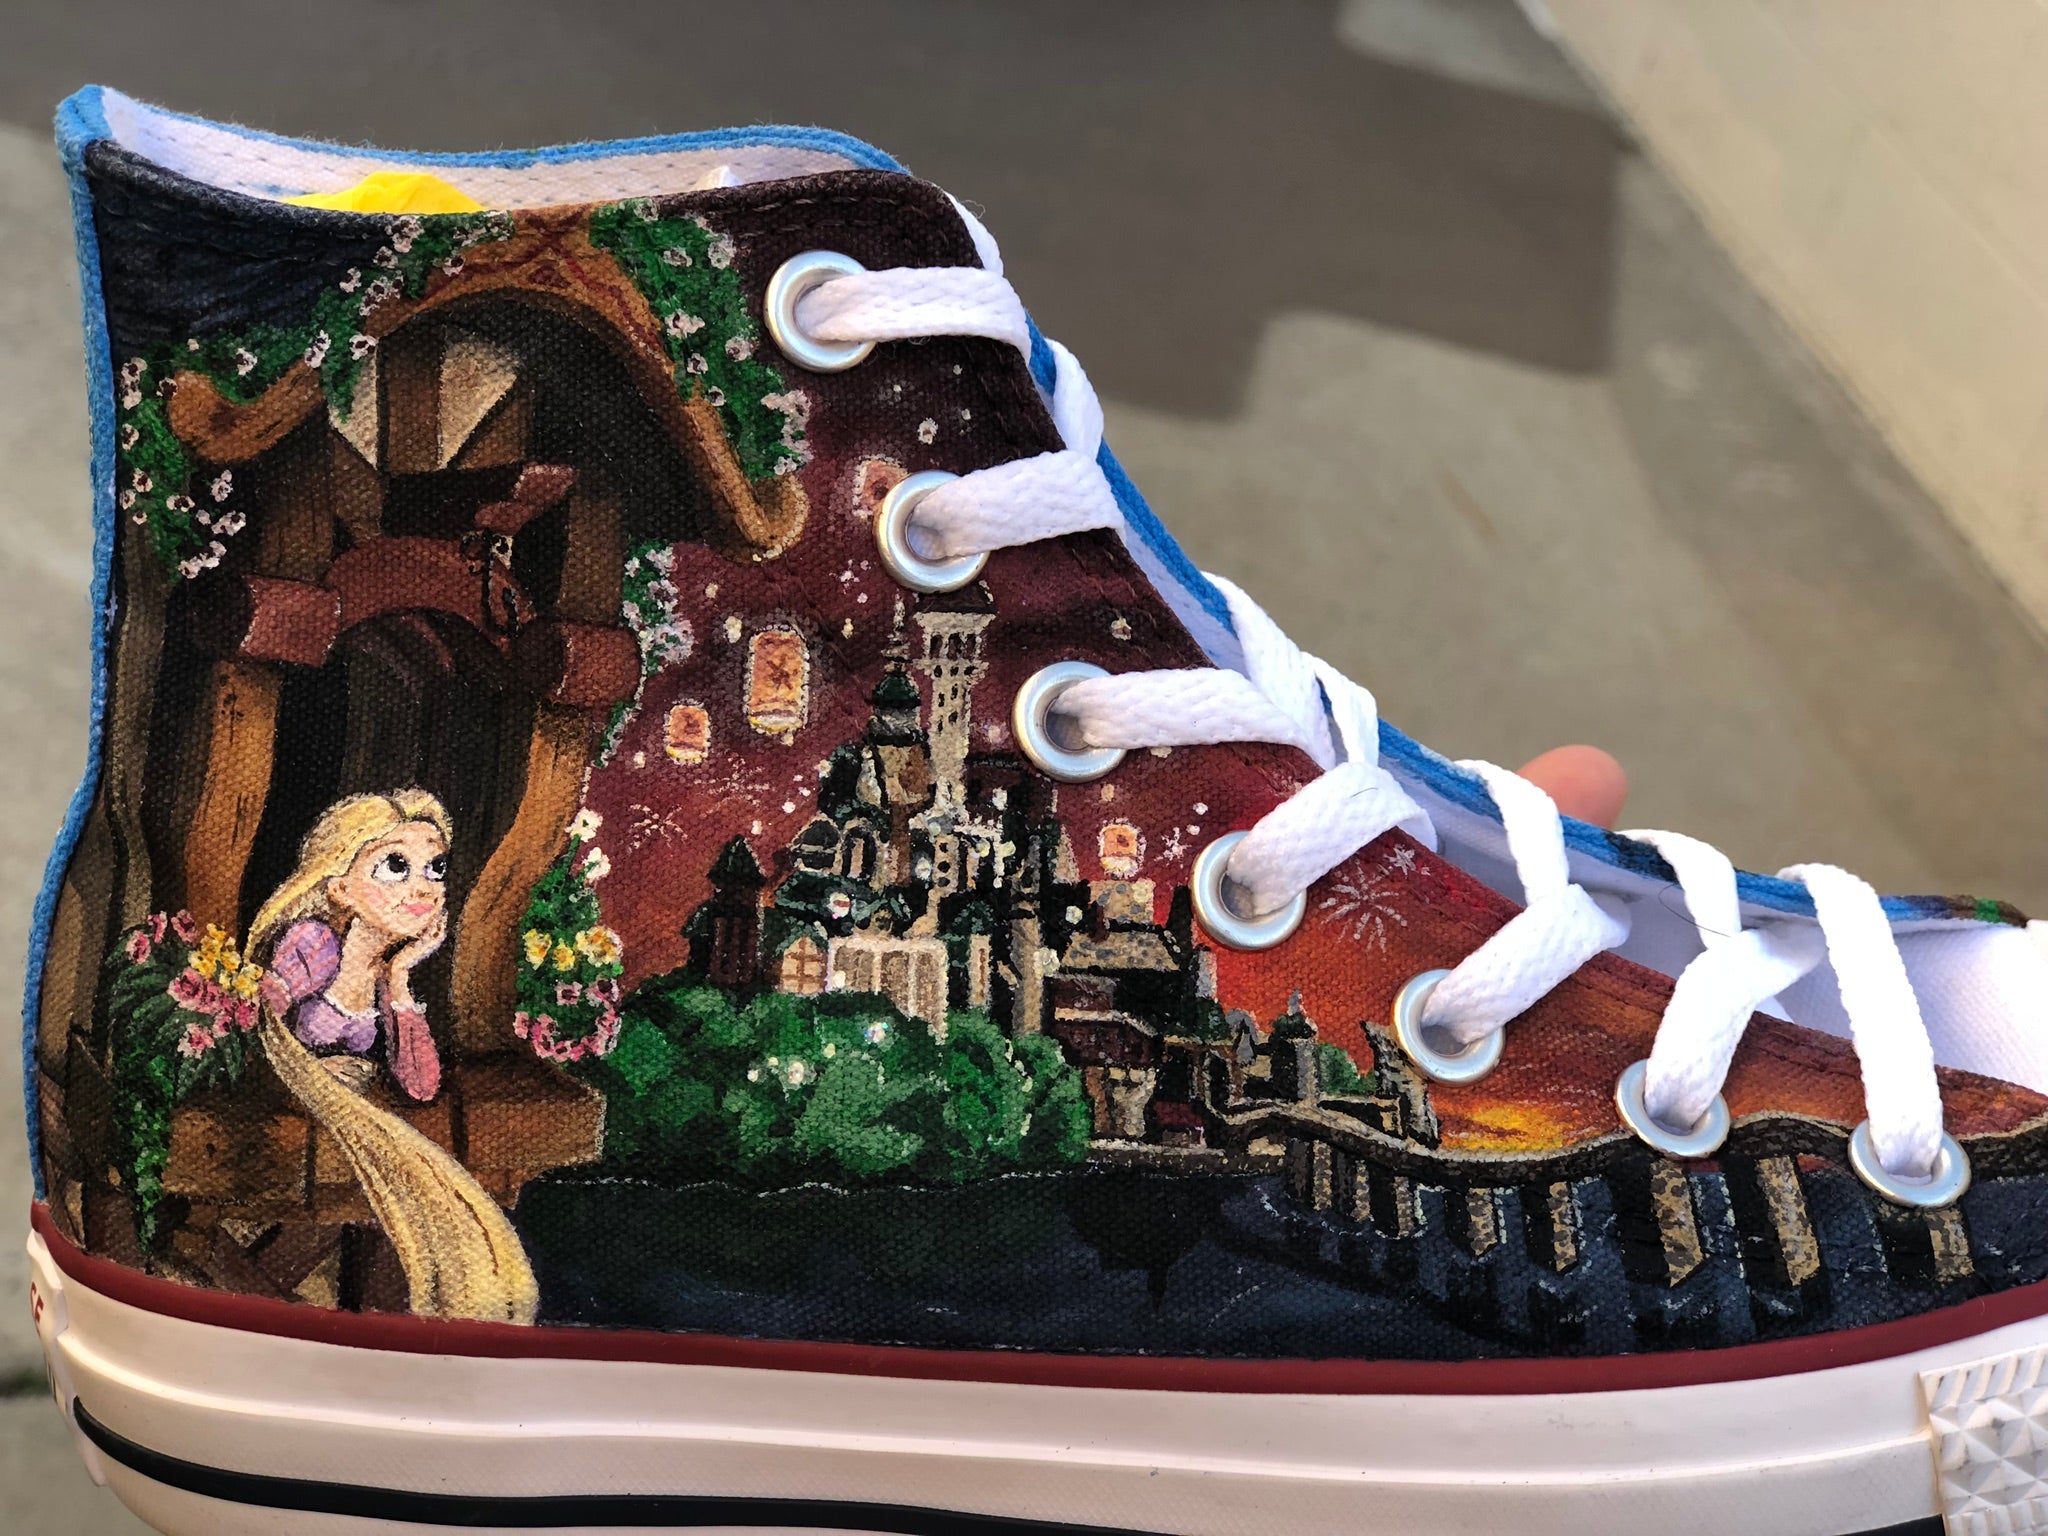 Custom Hand Painted Converse Low Top Shoes With Disney 